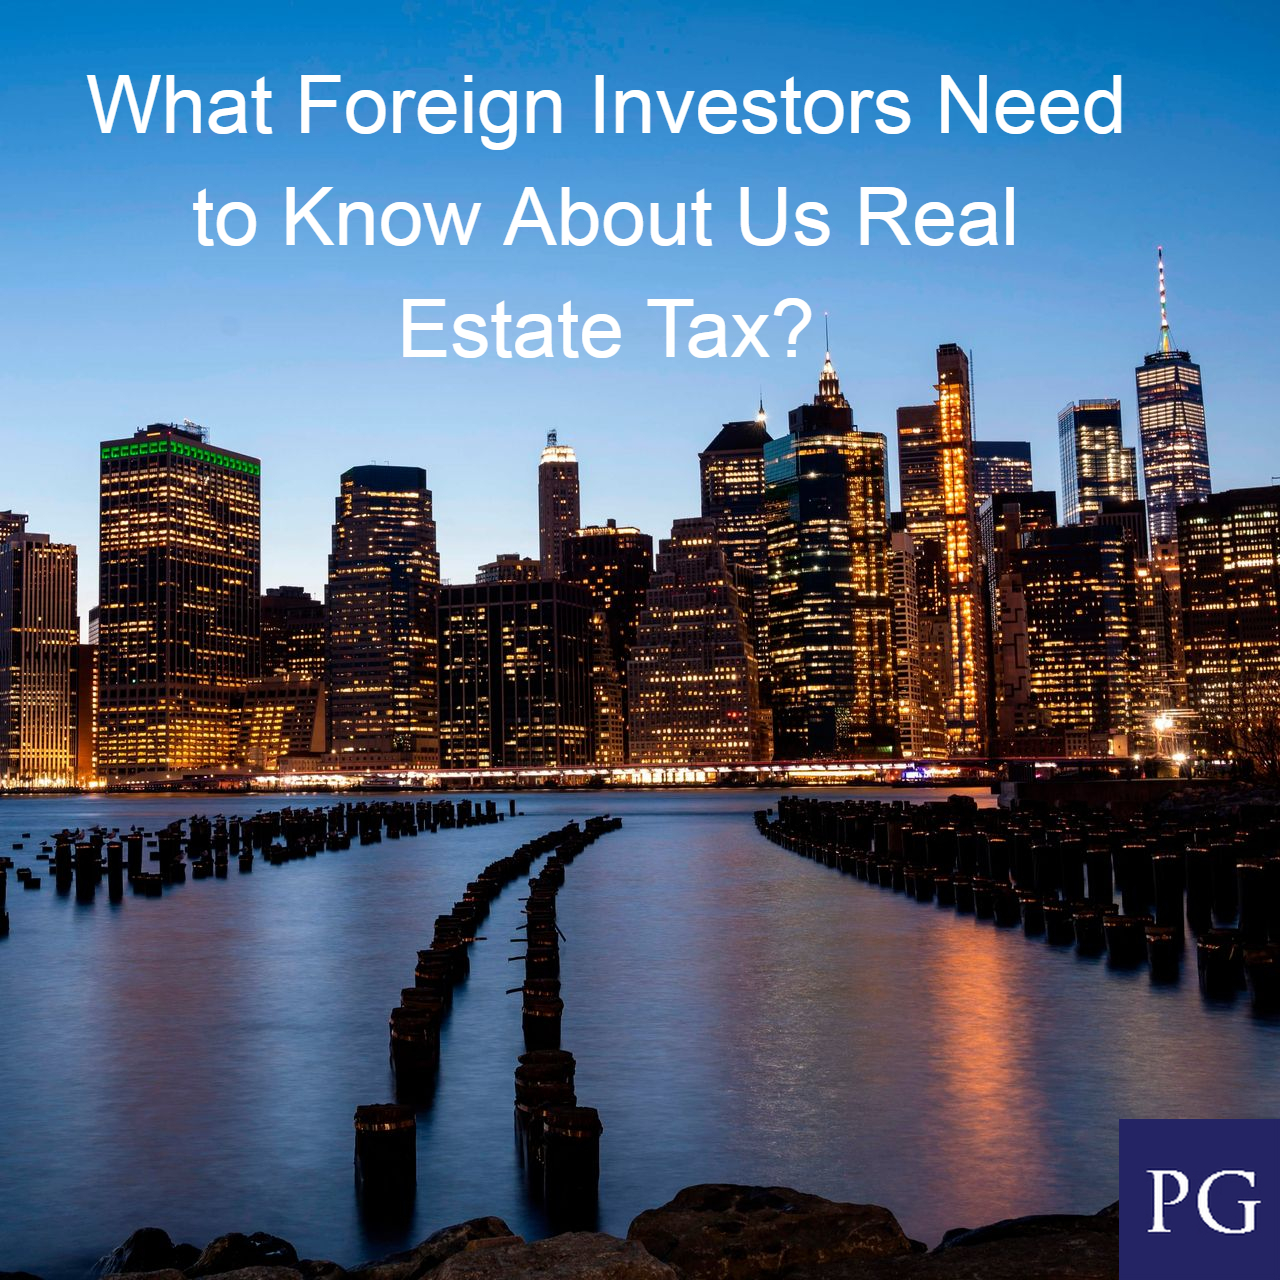 What Foreign Investors Need to Know About Us Real Estate Tax